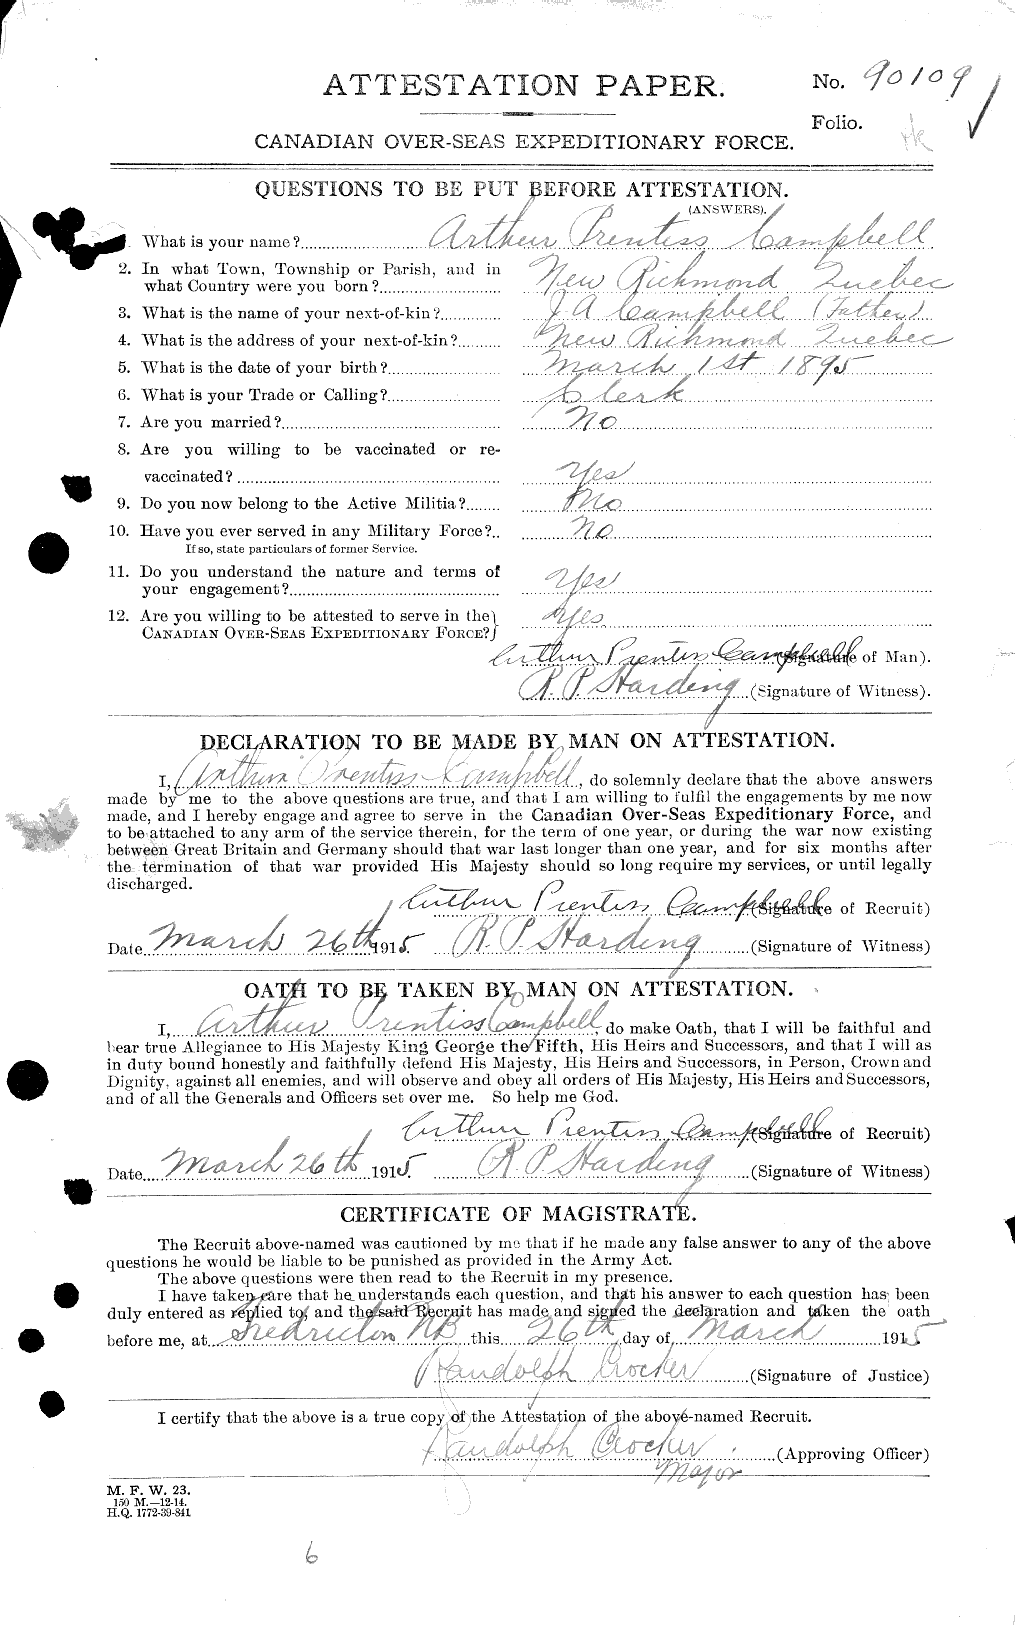 Personnel Records of the First World War - CEF 003517a